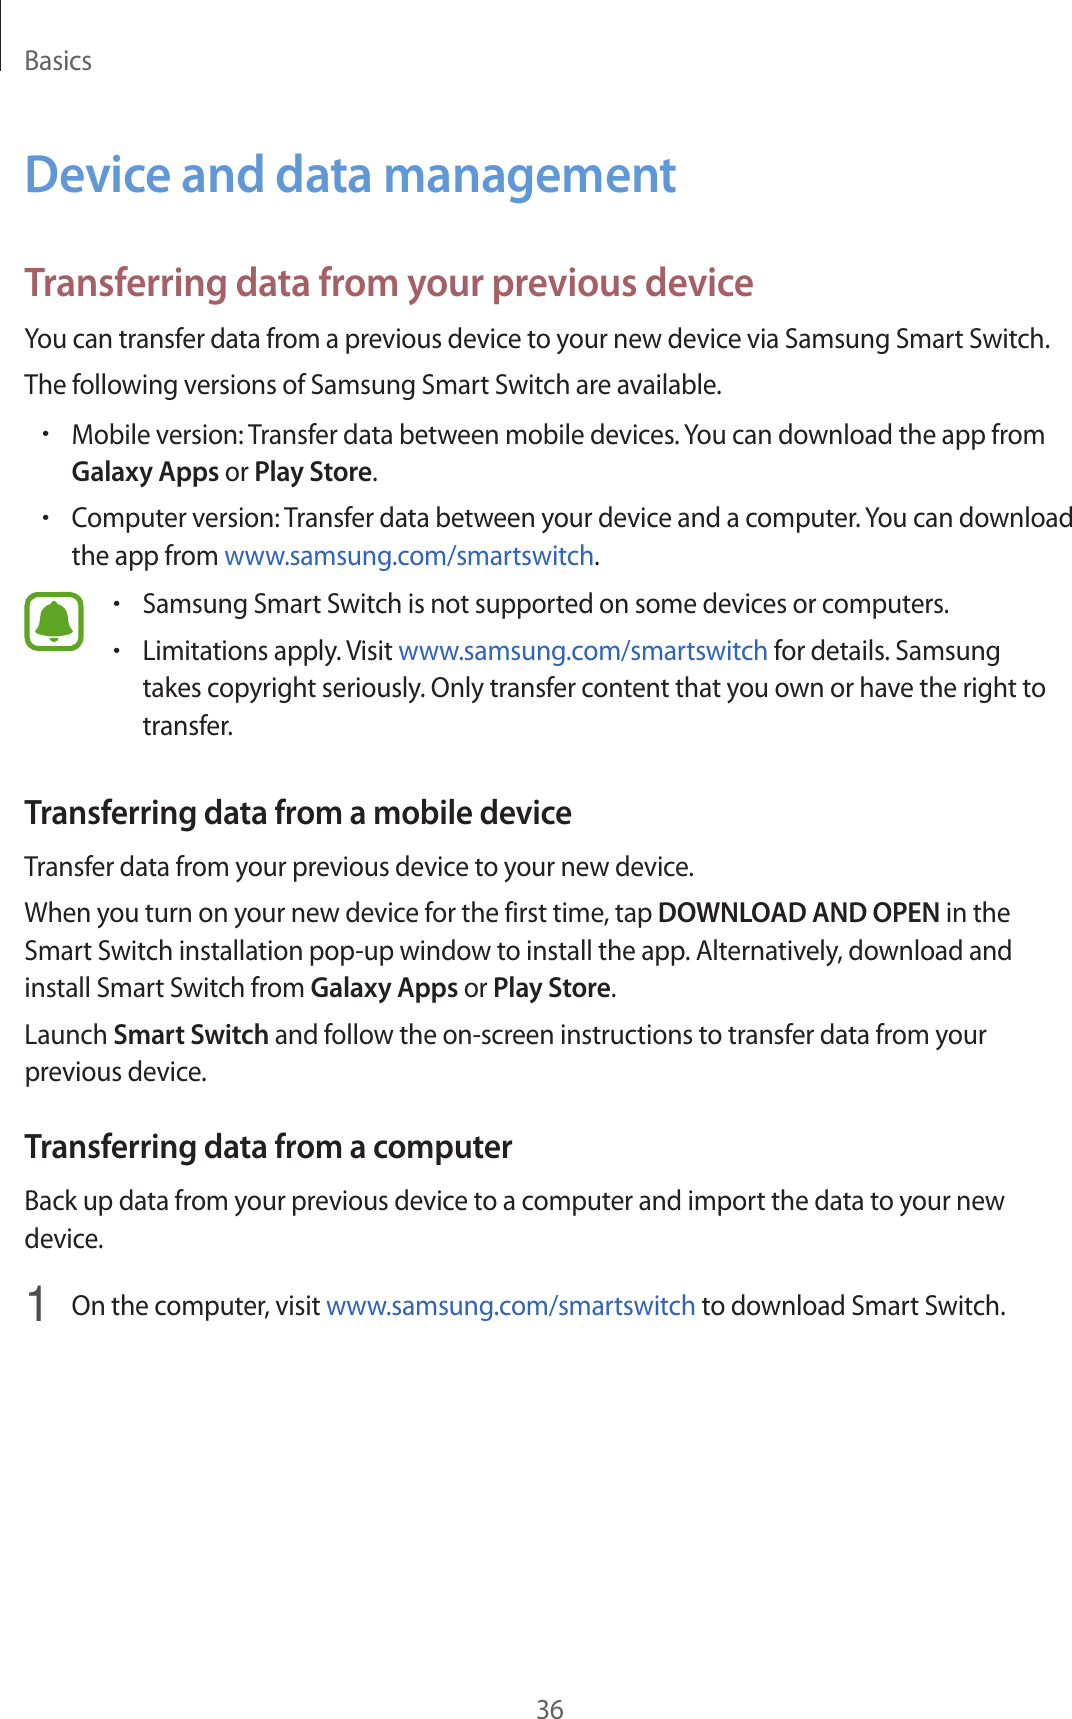 Basics36Device and data managementTransferring data from your previous deviceYou can transfer data from a previous device to your new device via Samsung Smart Switch.The following versions of Samsung Smart Switch are available.•Mobile version: Transfer data between mobile devices. You can download the app from Galaxy Apps or Play Store.•Computer version: Transfer data between your device and a computer. You can download the app from www.samsung.com/smartswitch.•Samsung Smart Switch is not supported on some devices or computers.•Limitations apply. Visit www.samsung.com/smartswitch for details. Samsung takes copyright seriously. Only transfer content that you own or have the right to transfer.Transferring data from a mobile deviceTransfer data from your previous device to your new device.When you turn on your new device for the first time, tap DOWNLOAD AND OPEN in the Smart Switch installation pop-up window to install the app. Alternatively, download and install Smart Switch from Galaxy Apps or Play Store.Launch Smart Switch and follow the on-screen instructions to transfer data from your previous device.Transferring data from a computerBack up data from your previous device to a computer and import the data to your new device.1  On the computer, visit www.samsung.com/smartswitch to download Smart Switch.